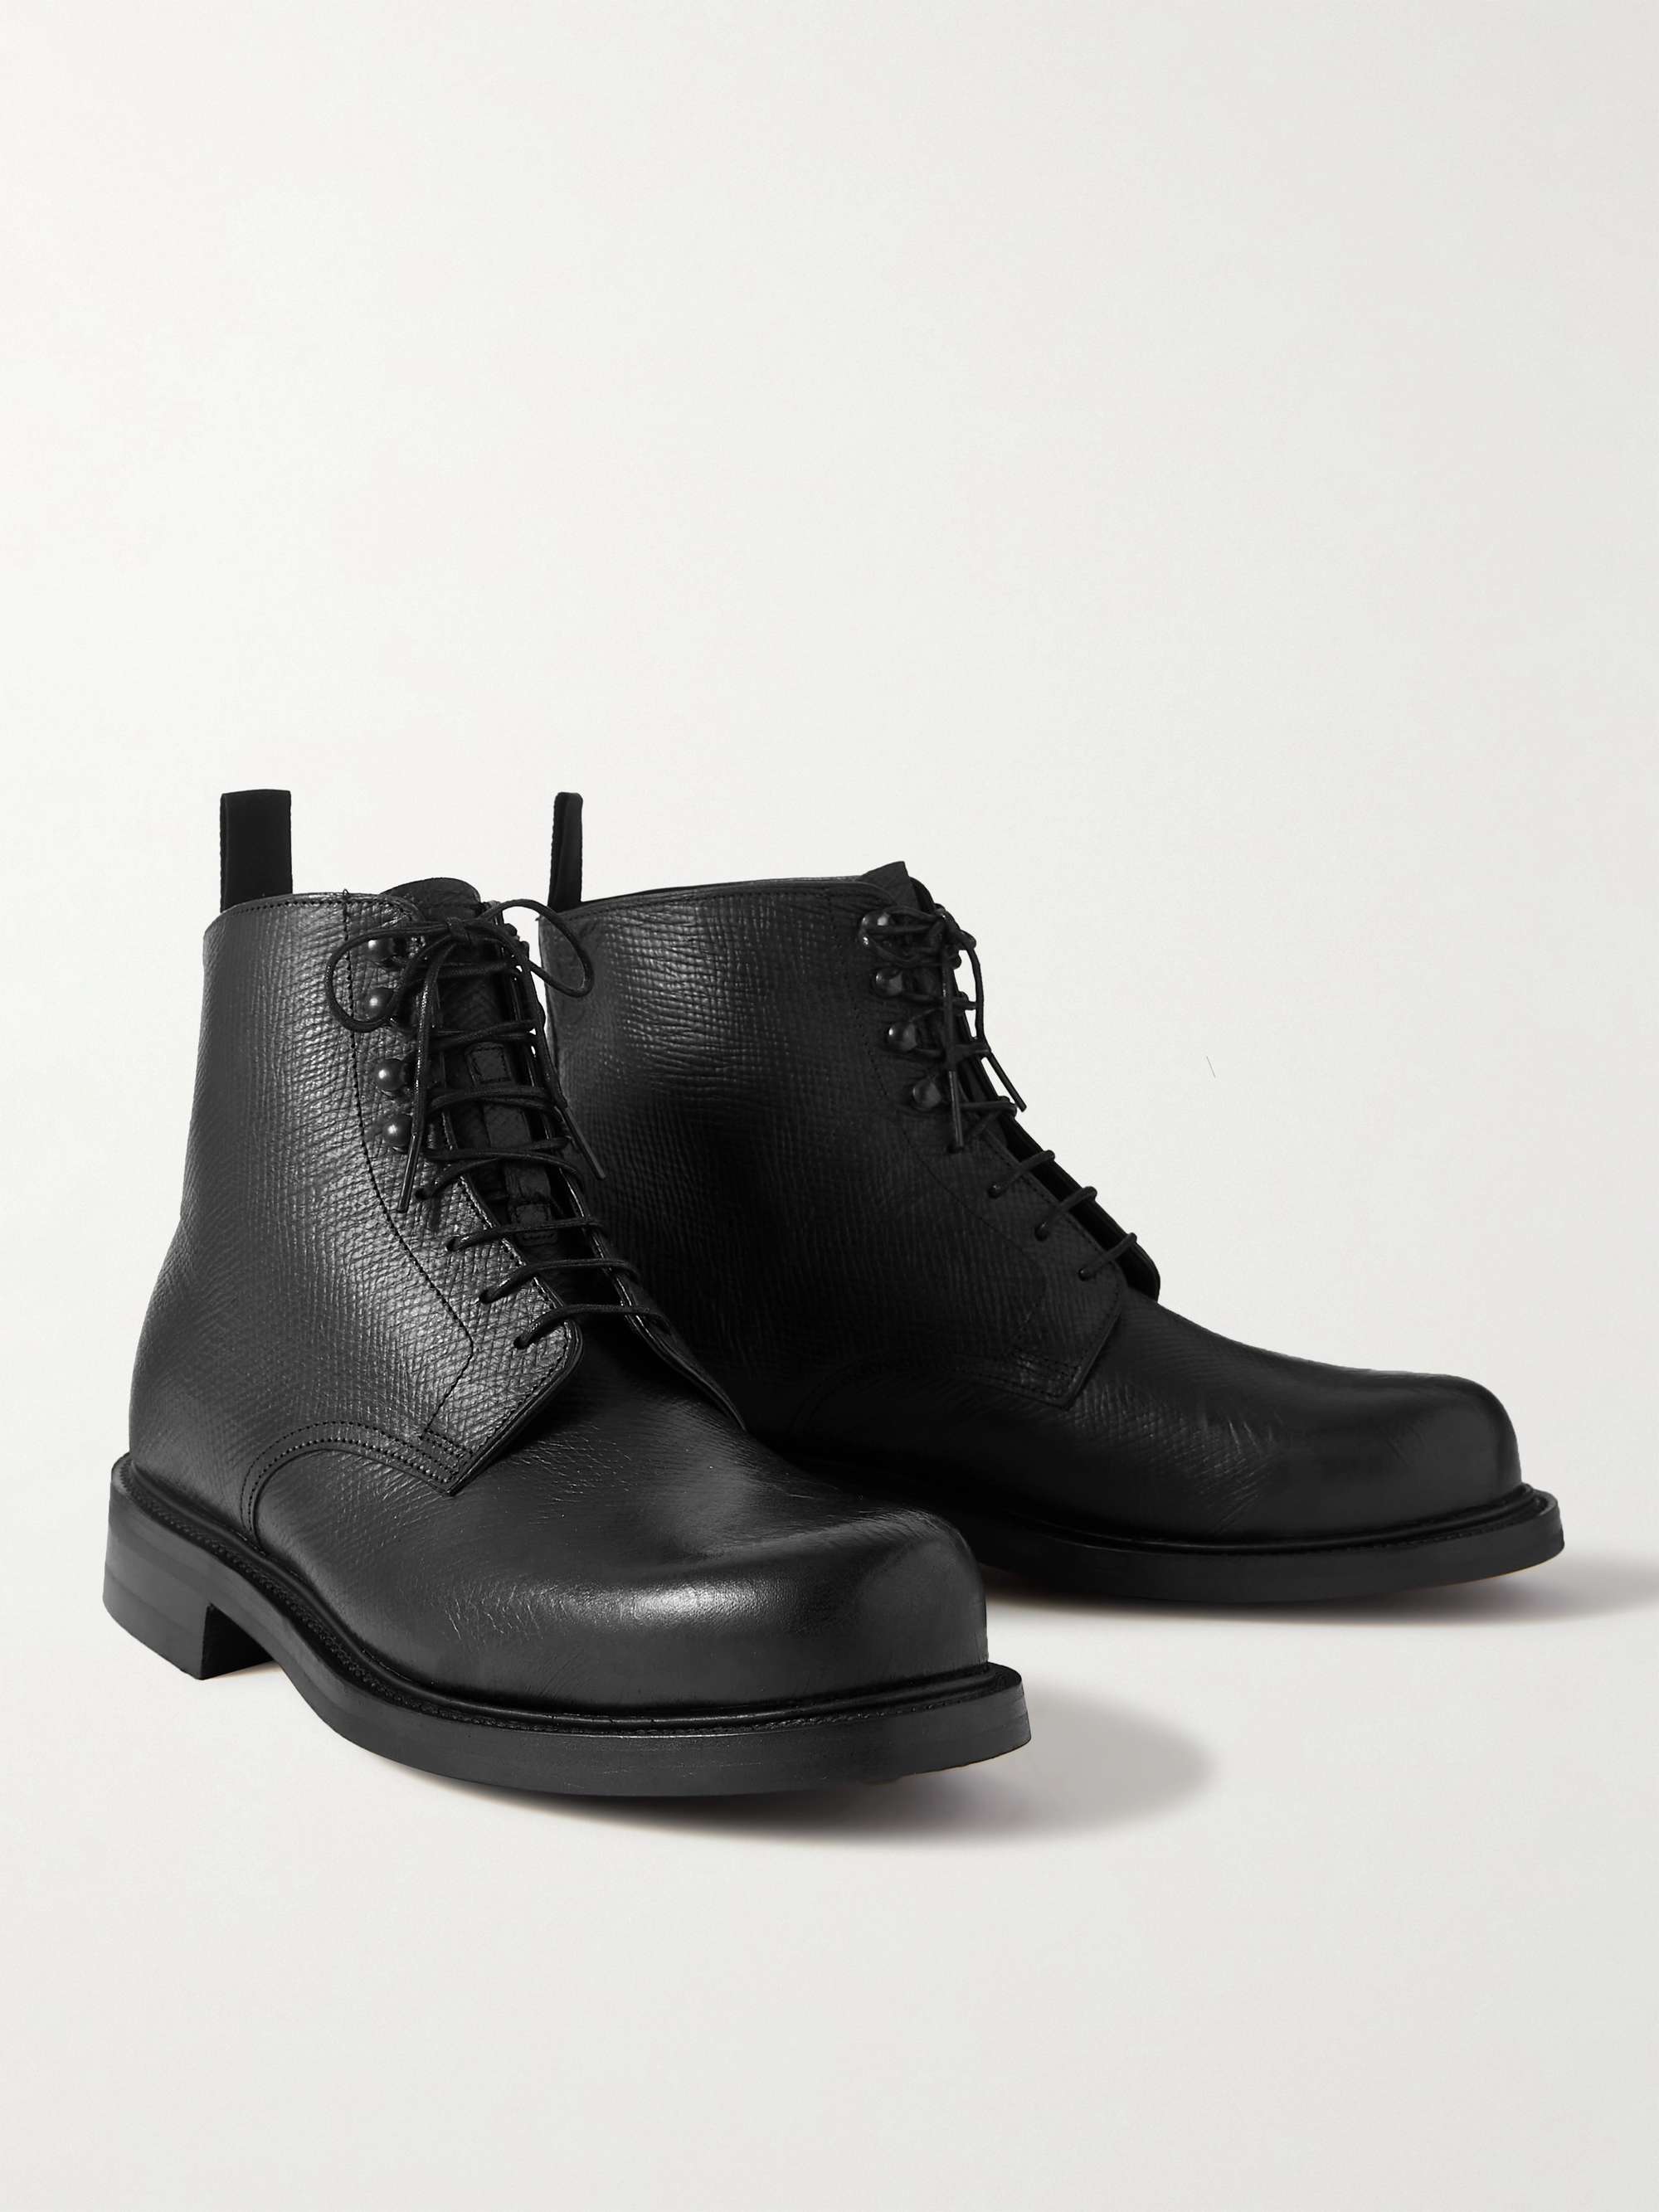 GEORGE CLEVERLEY Taron 2 Full-Grain Leather Derby Boots